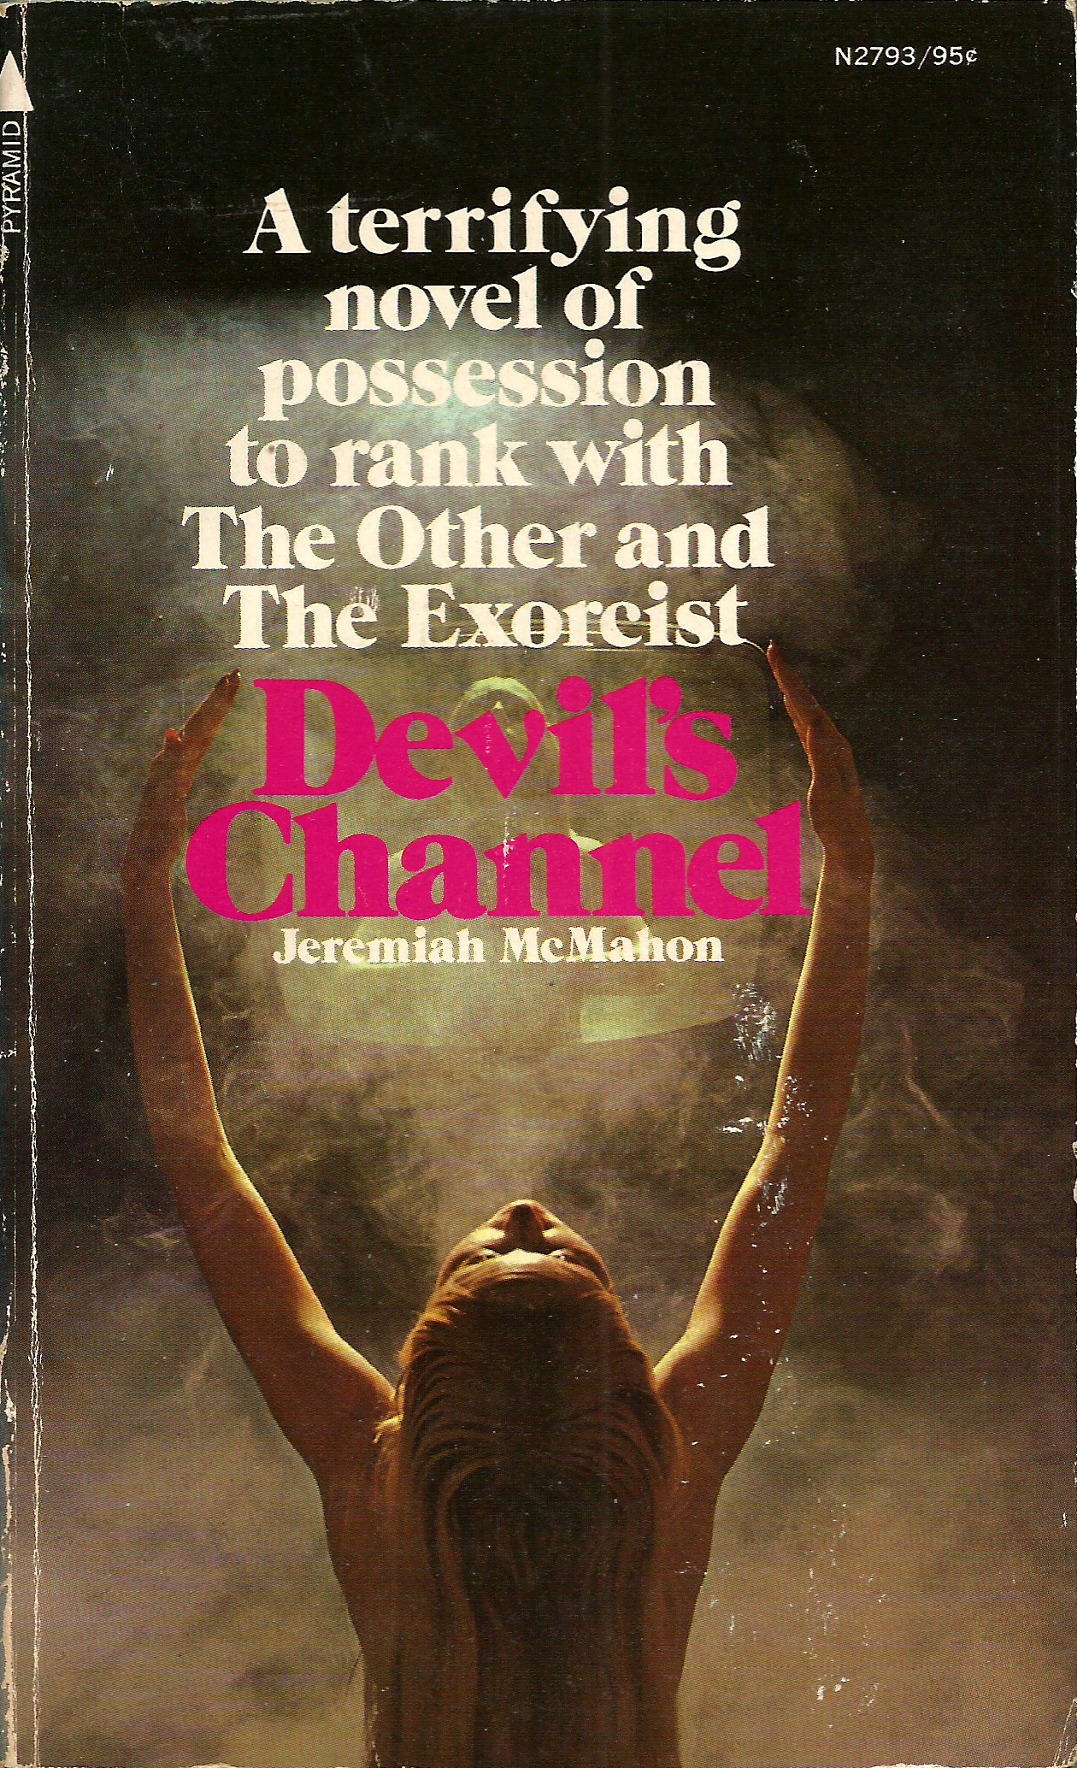 Devil’s Channel, by Jeremiah McMahon (Pyramid, 1972).From a charity shop in Arnold,